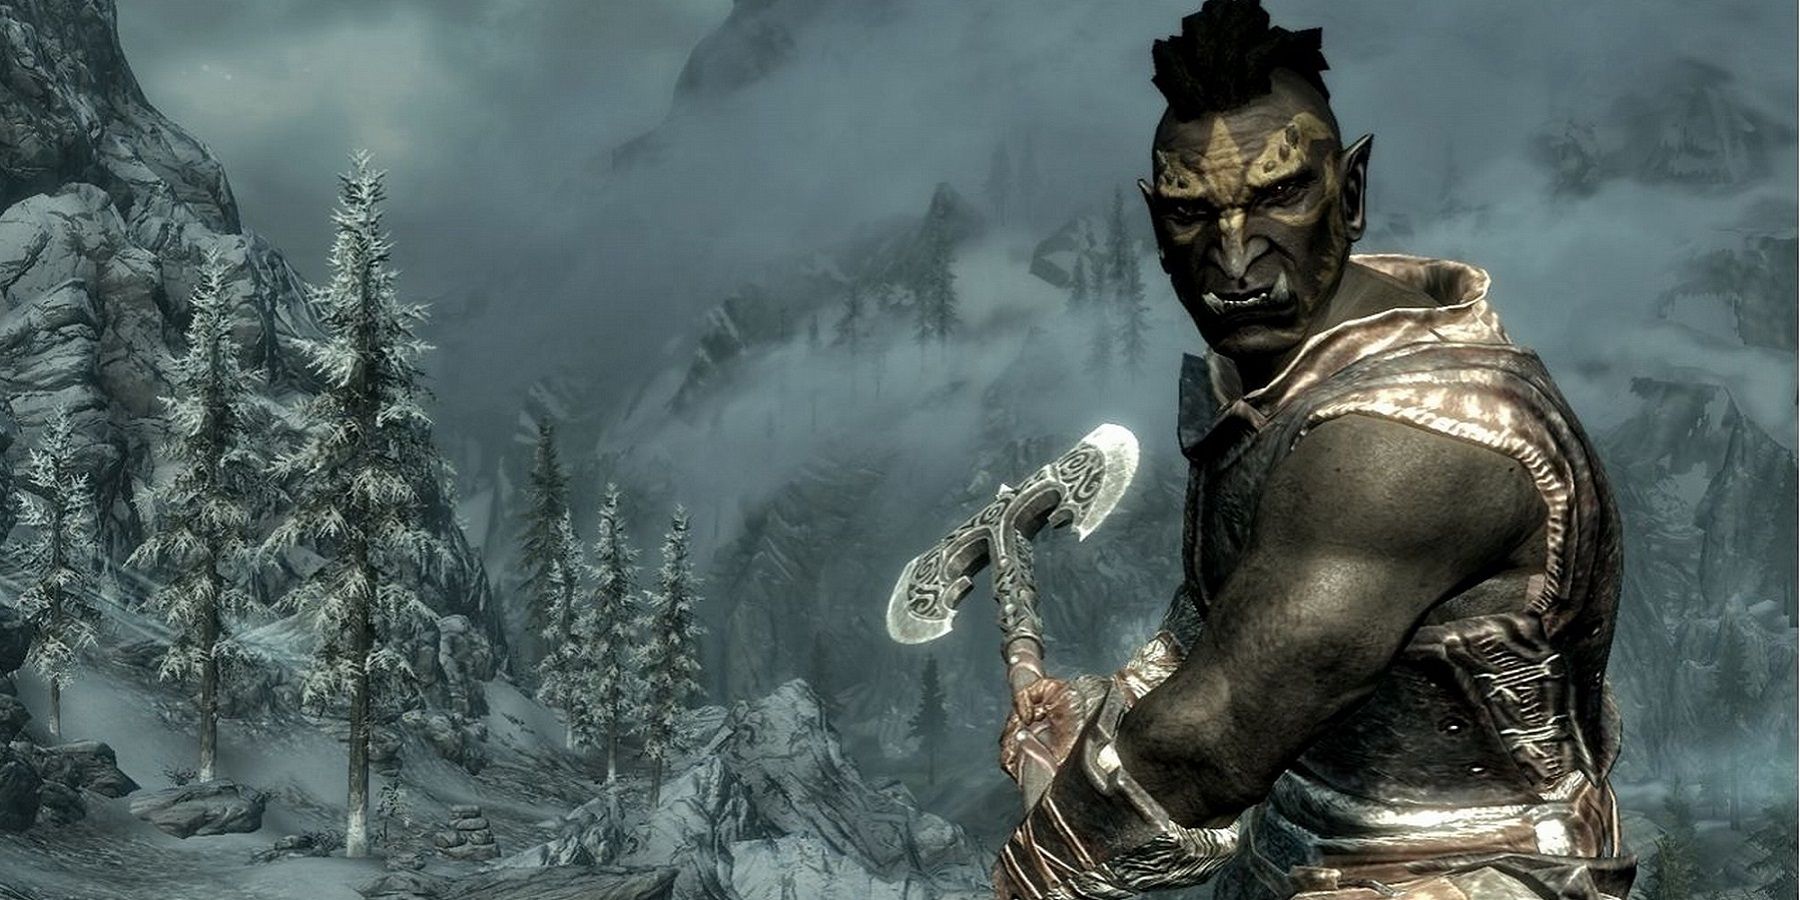 Image from Skyrim showing an Orc stood on a mountain whilst holding a two-handed axe.